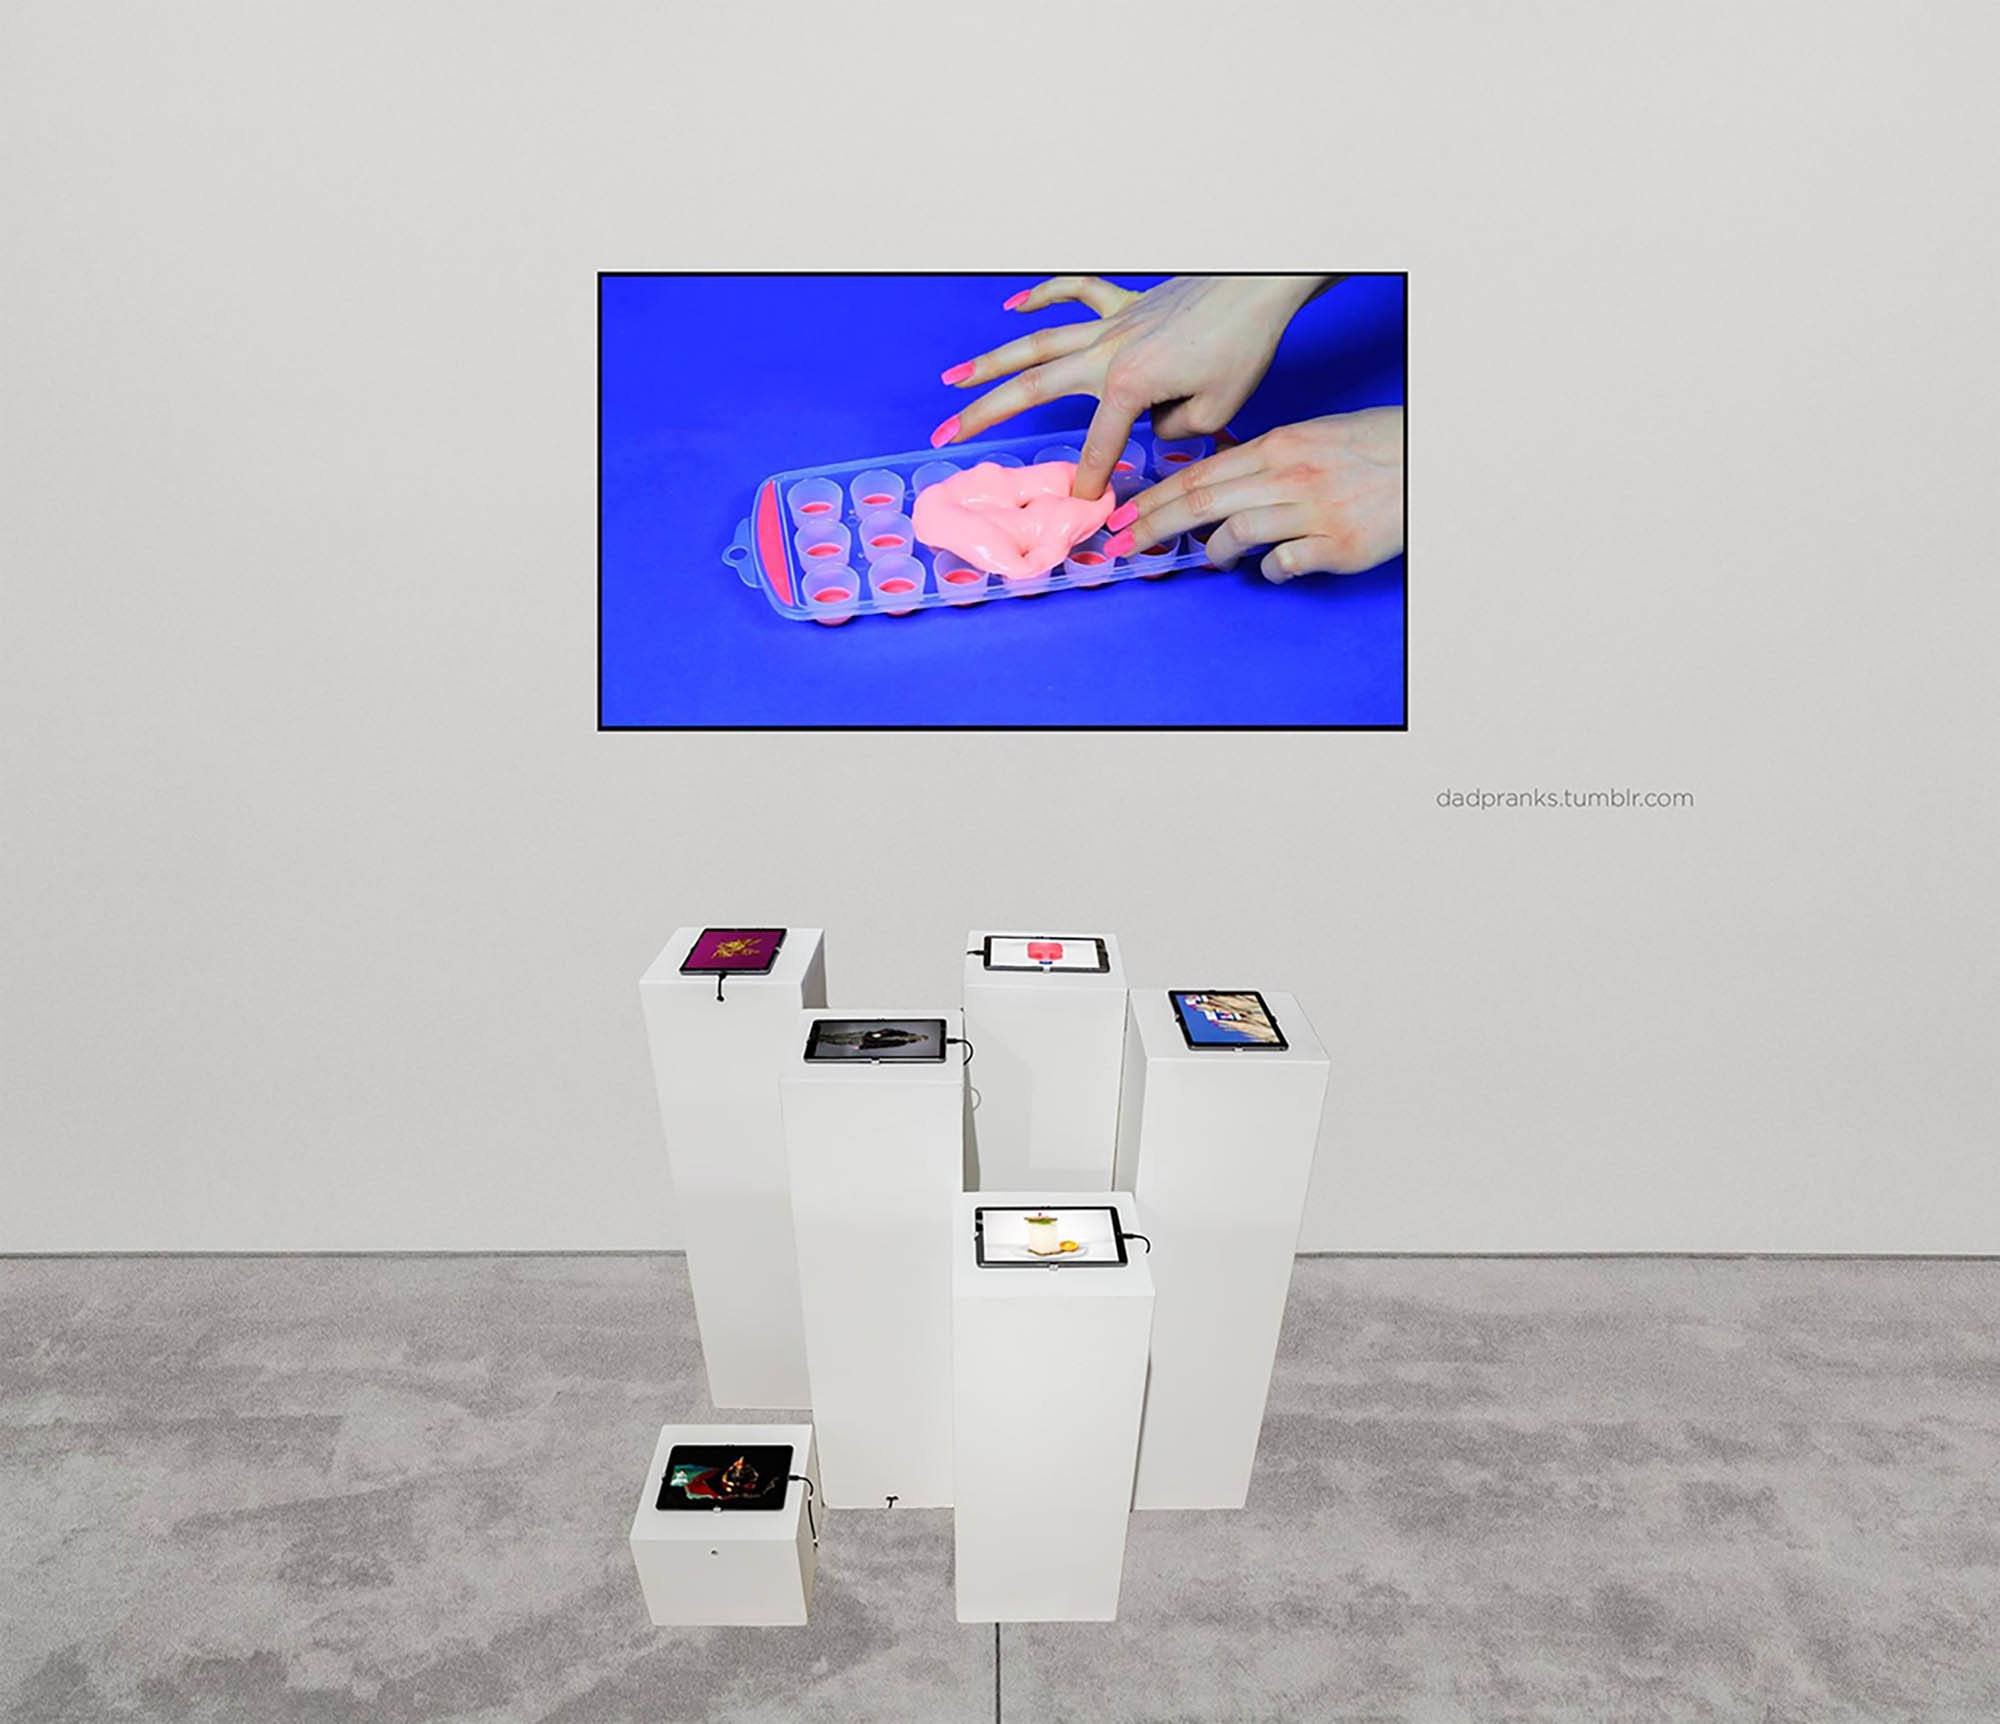 An installation image of a screen showing hands pushing putty into an ice tray, with smaller screens on pedestals